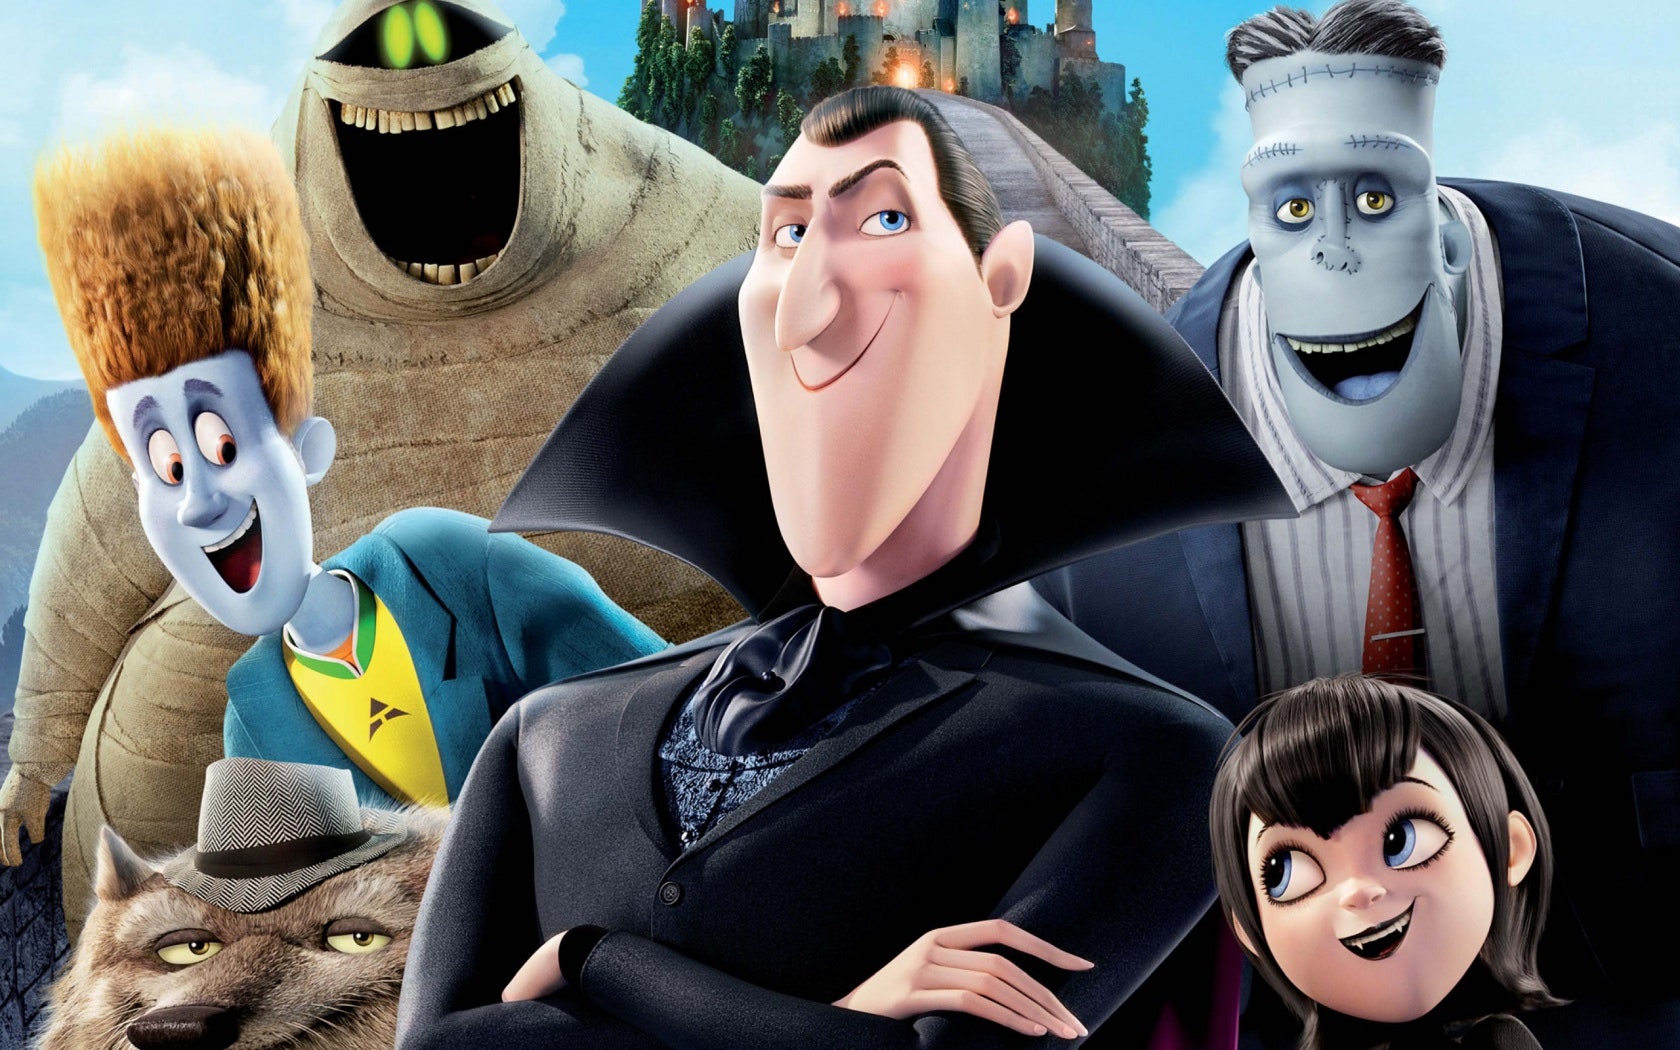 Trailer of Hotel Transylvania 4: release date July 23, 2021 in theatres